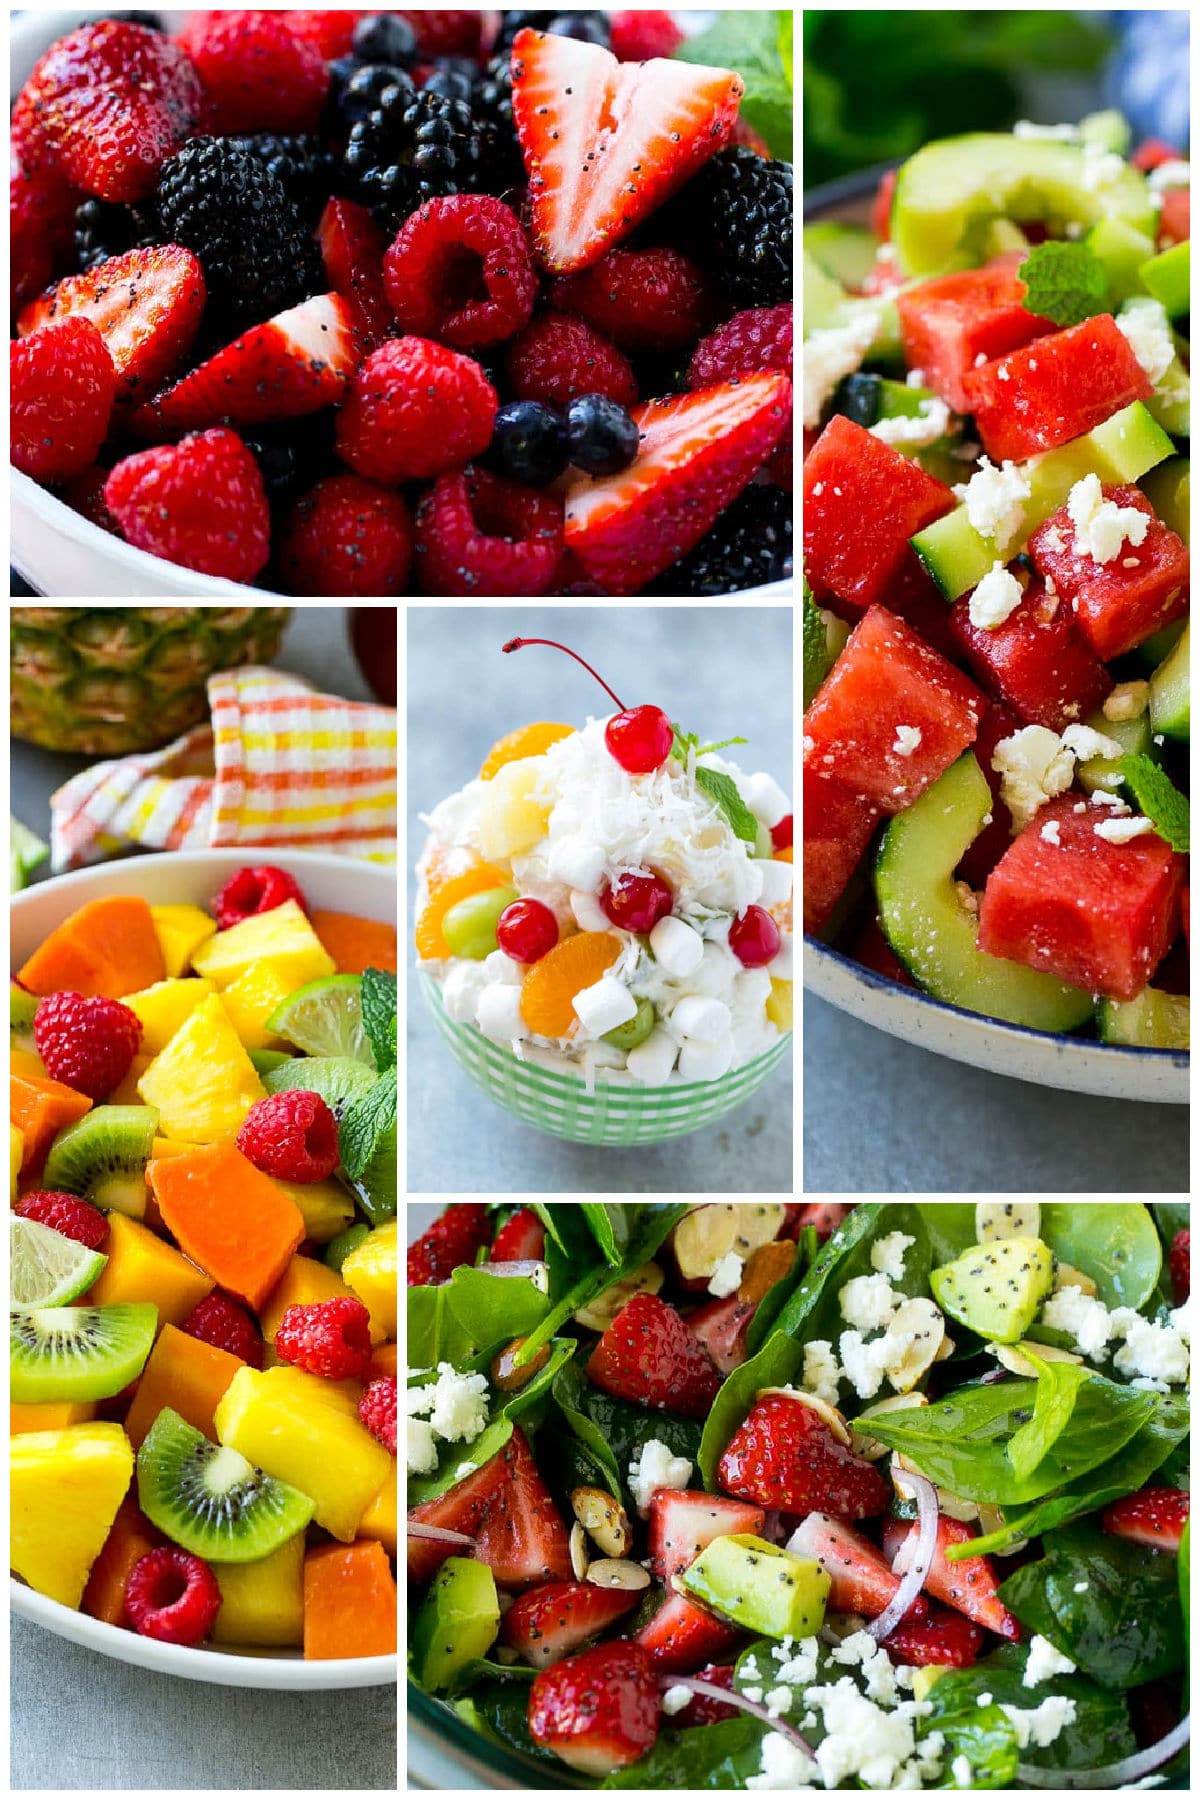 A group of salads featuring fruit like berry fruit salad, strawberry spinach salad and ambrosia salad.